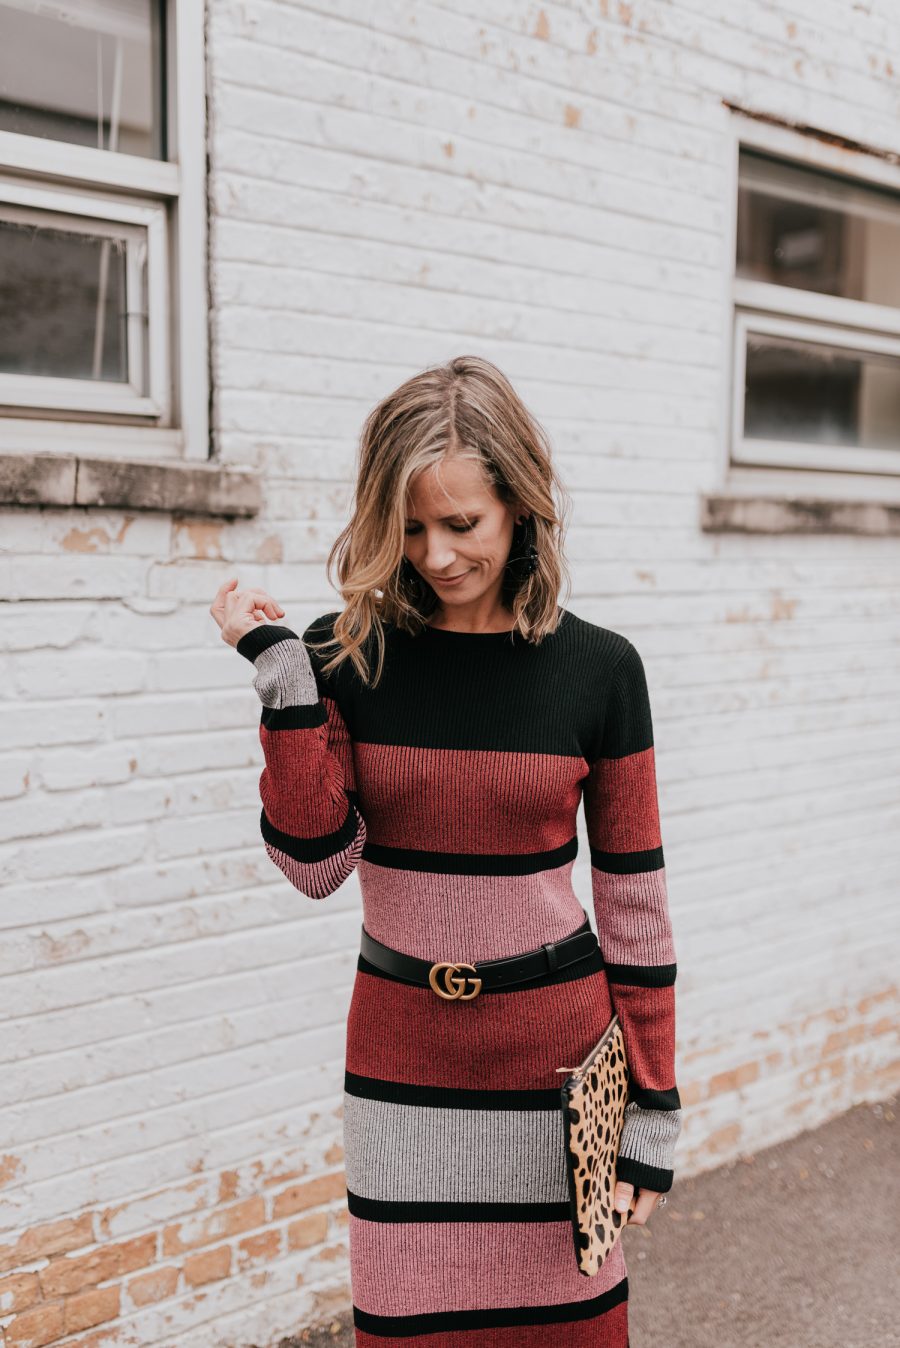 Striped dress: holiday party